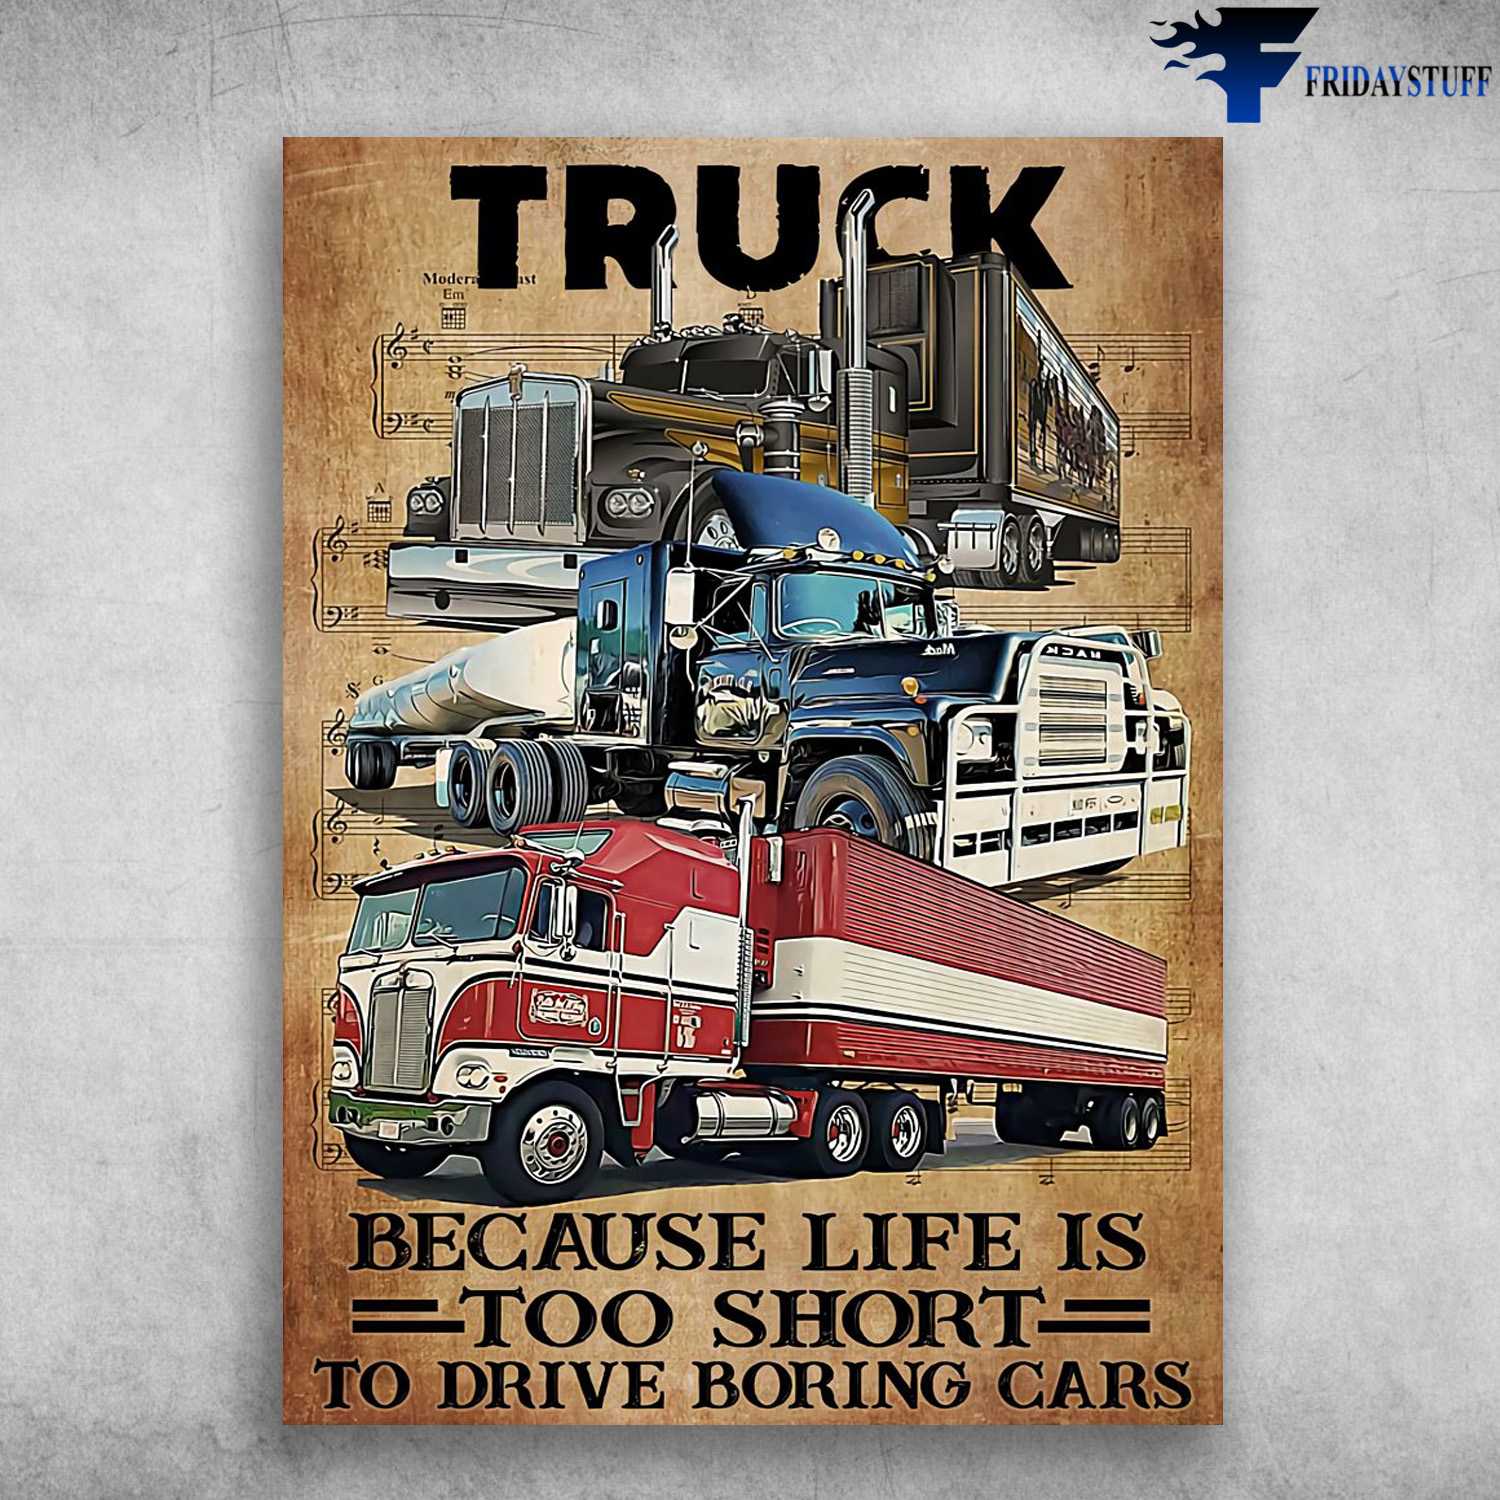 Trucker Poster, Truck Because Life Is Too Short, To Drive Boring Cars